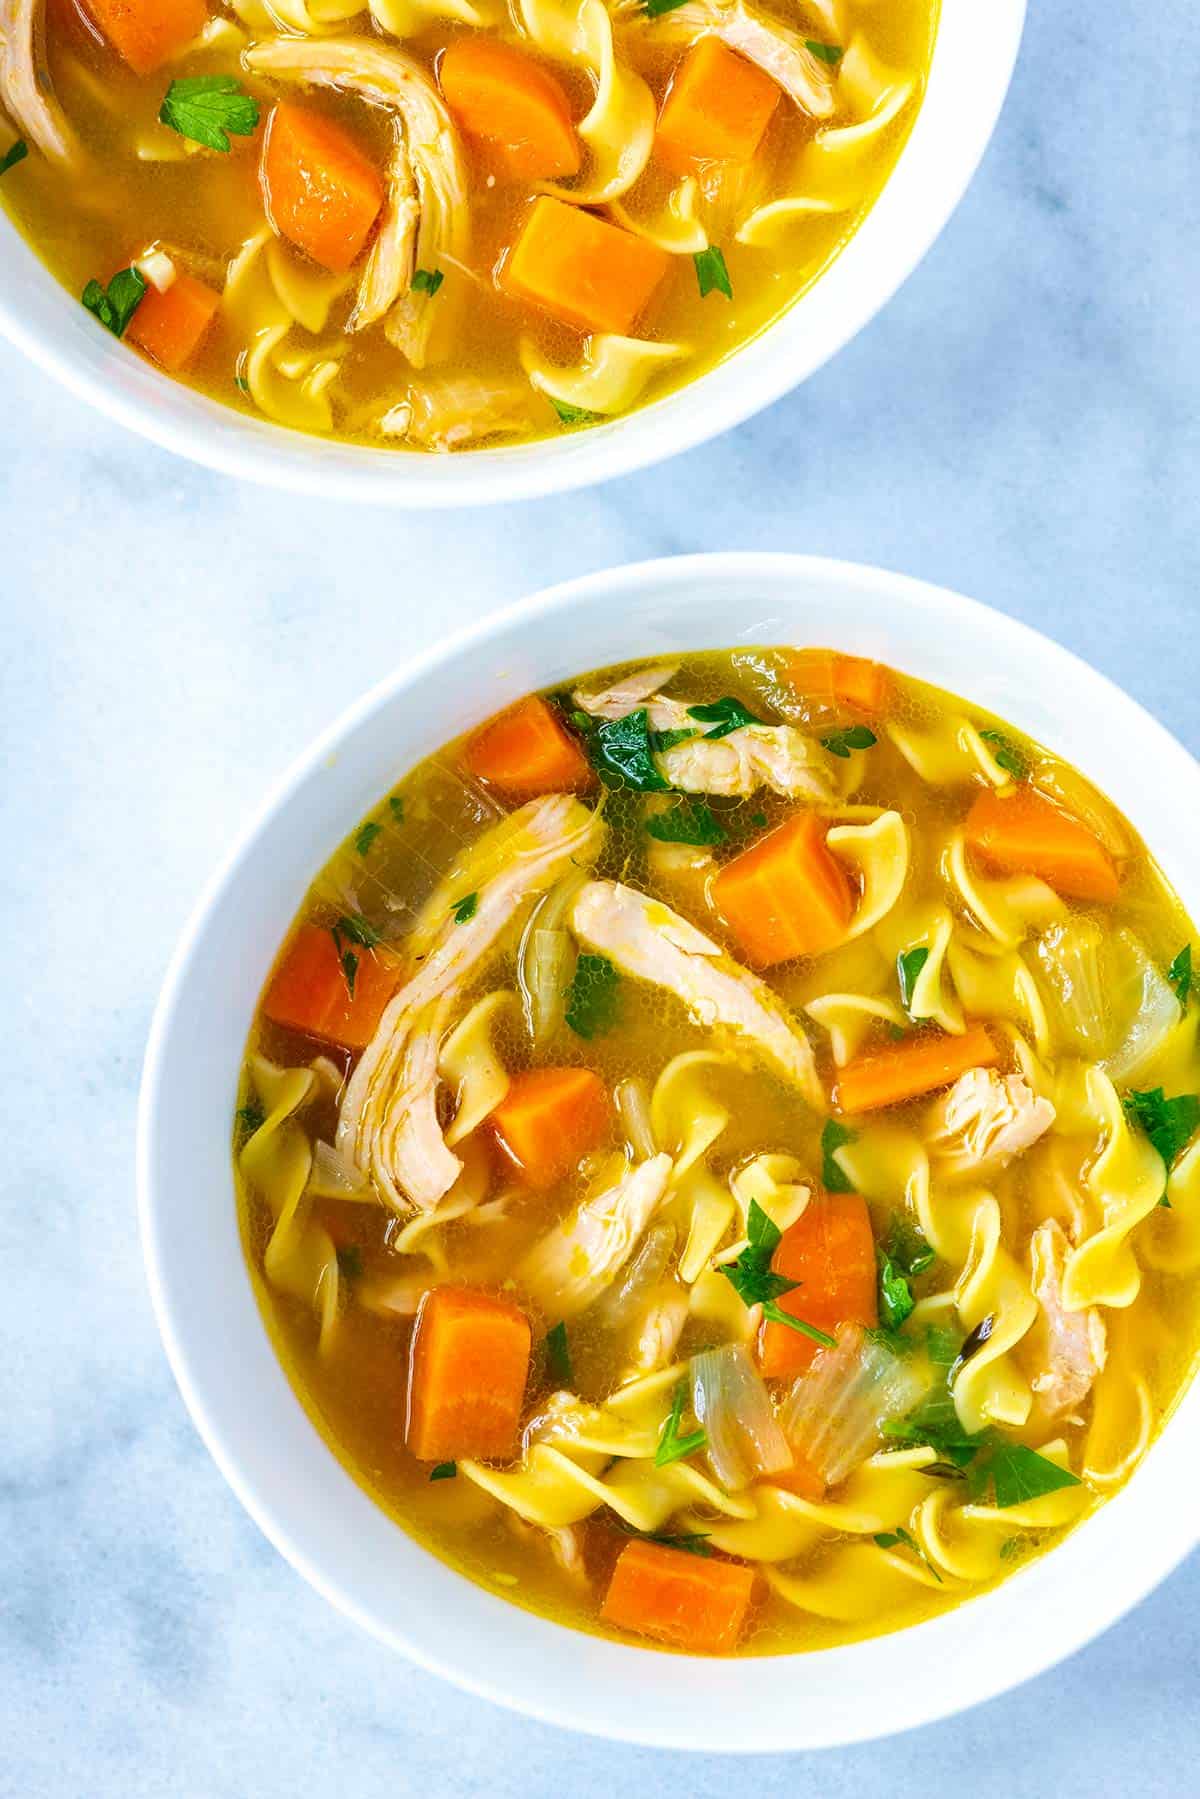 Best Chicken Noodle Soup Recipe - How To Make Chicken Noodle Soup